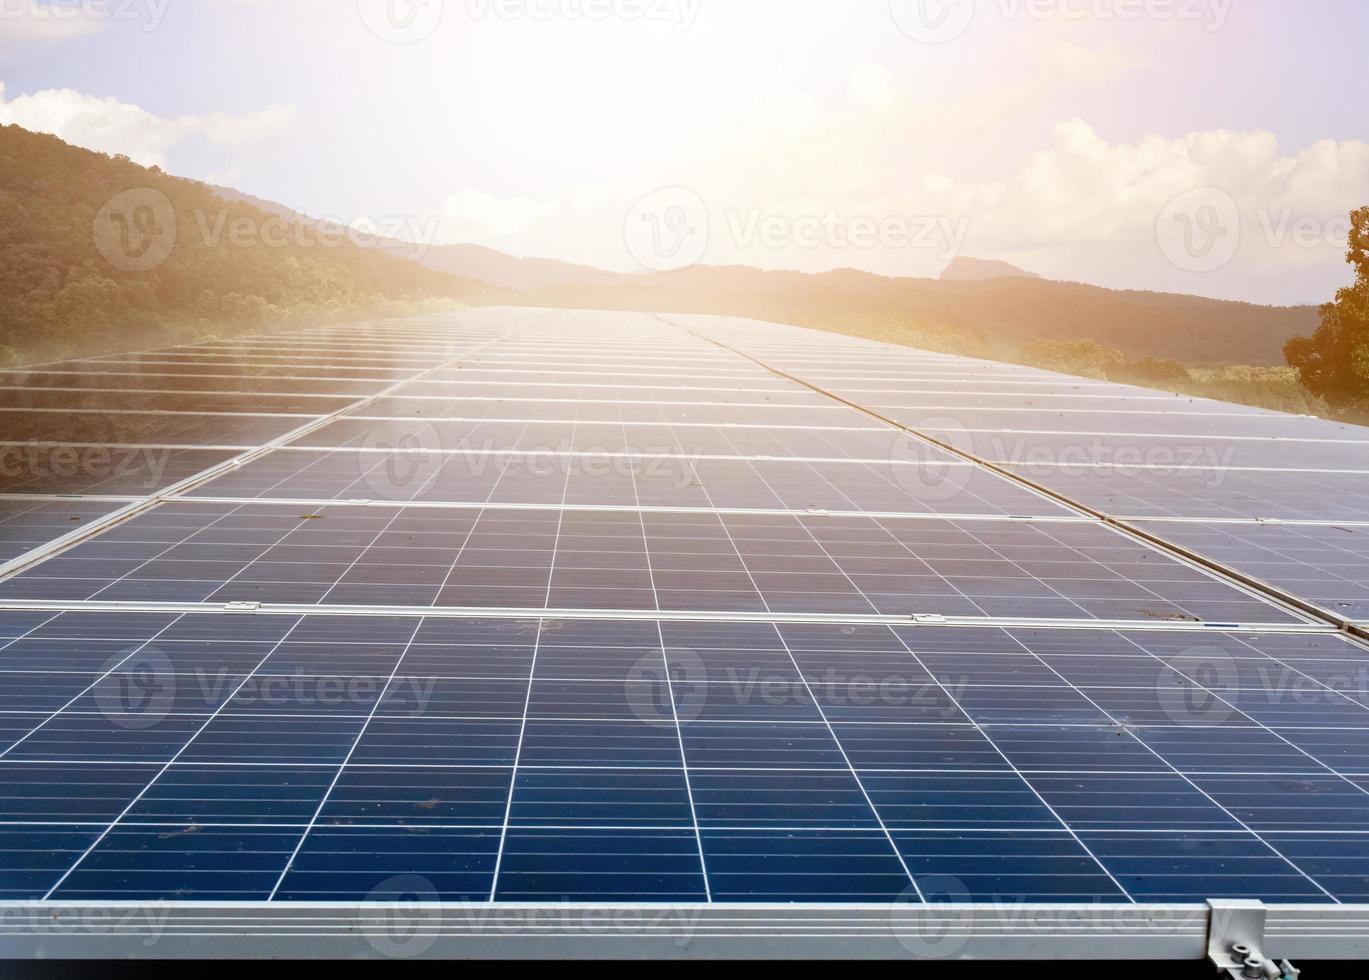 Solar panels, whose upper surface is soiled by rainwater stains, bird droppaings and dust, need to be cleaned to optimize the energy storage of the sun during the day, soft focus. photo